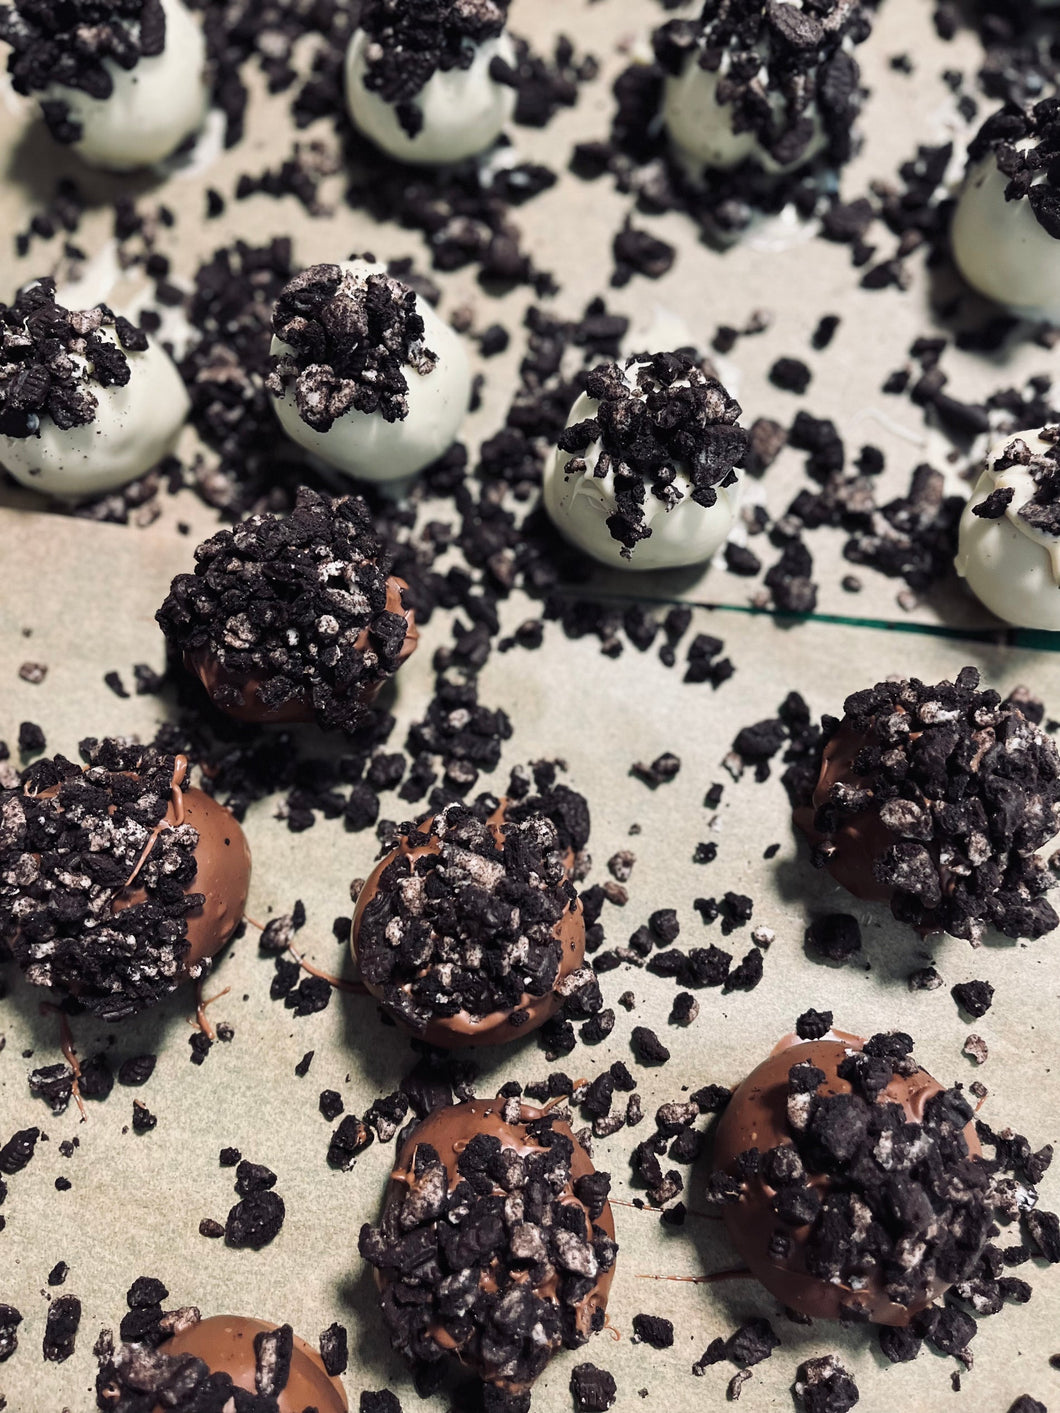 Gifts for under £5 - Box of 6 mini Oreo Truffles